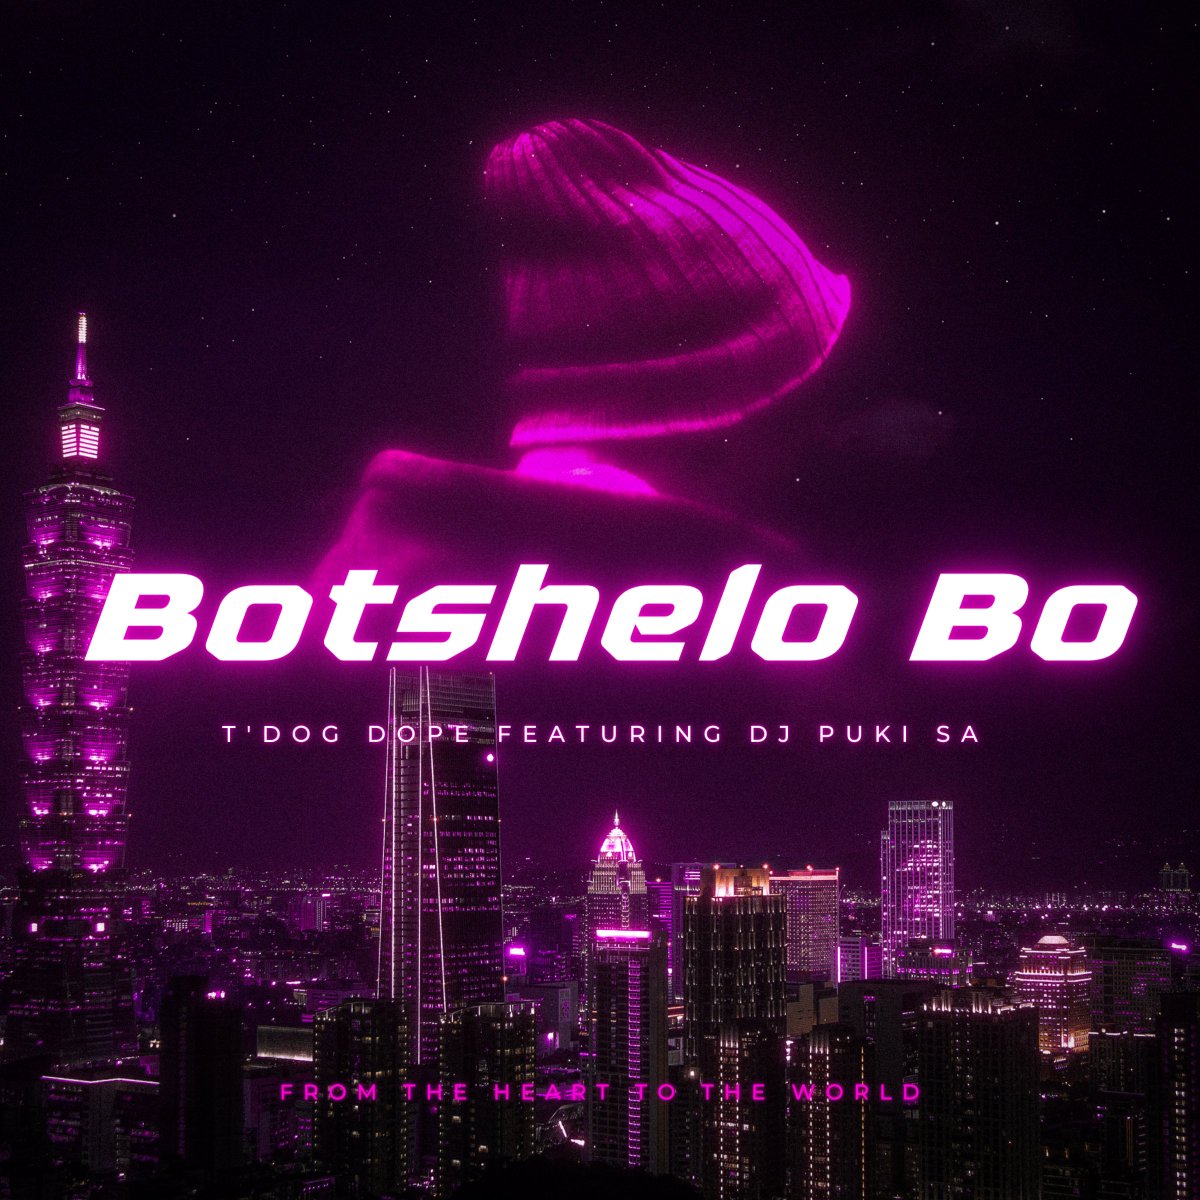 'Excited to be featured on the amapiano banger 'Botshelo Bo' by T'DOG DOPE! 🎵 This track captures the realness of life and the importance of hustle to thrive in this world. 💪💰 Don't sleep on this one, it's a vibe! 🙌 #amapianomusic #BotsheloBo #MoneyMoves #djpukisa @TDOGDOPE